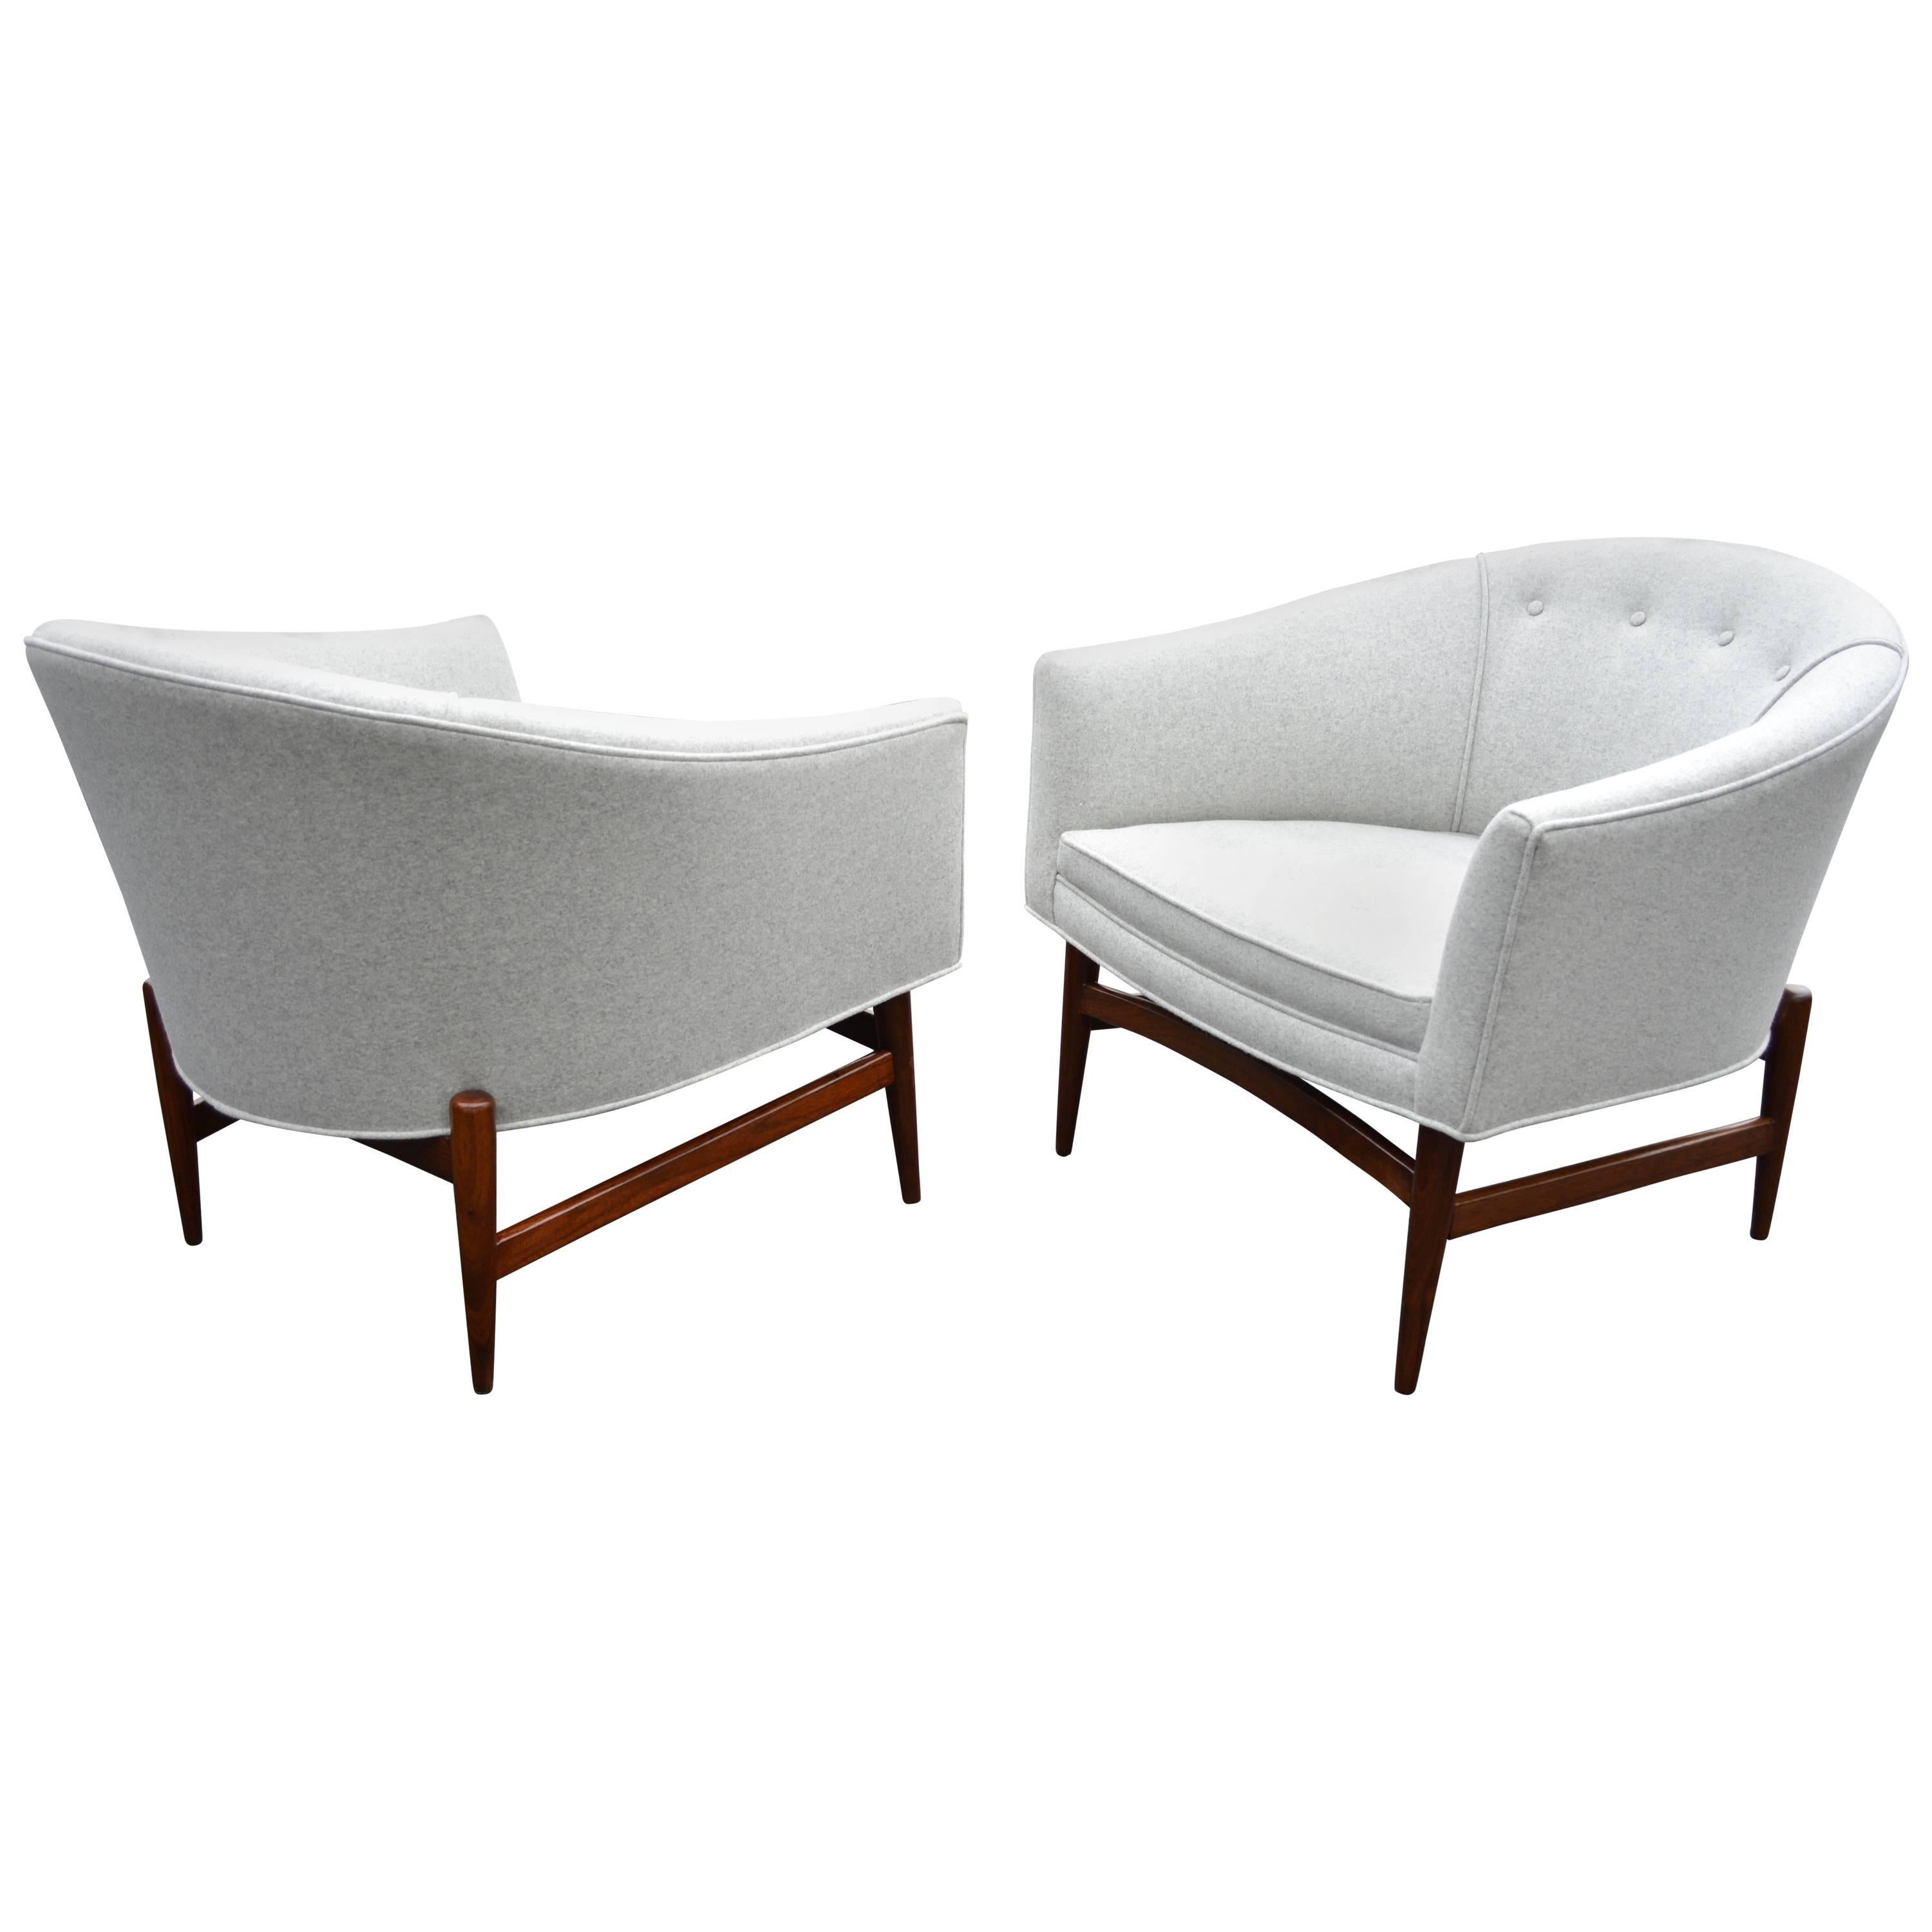 Pair of Lawrence Peabody Mid-Century Modern Lounge Chairs